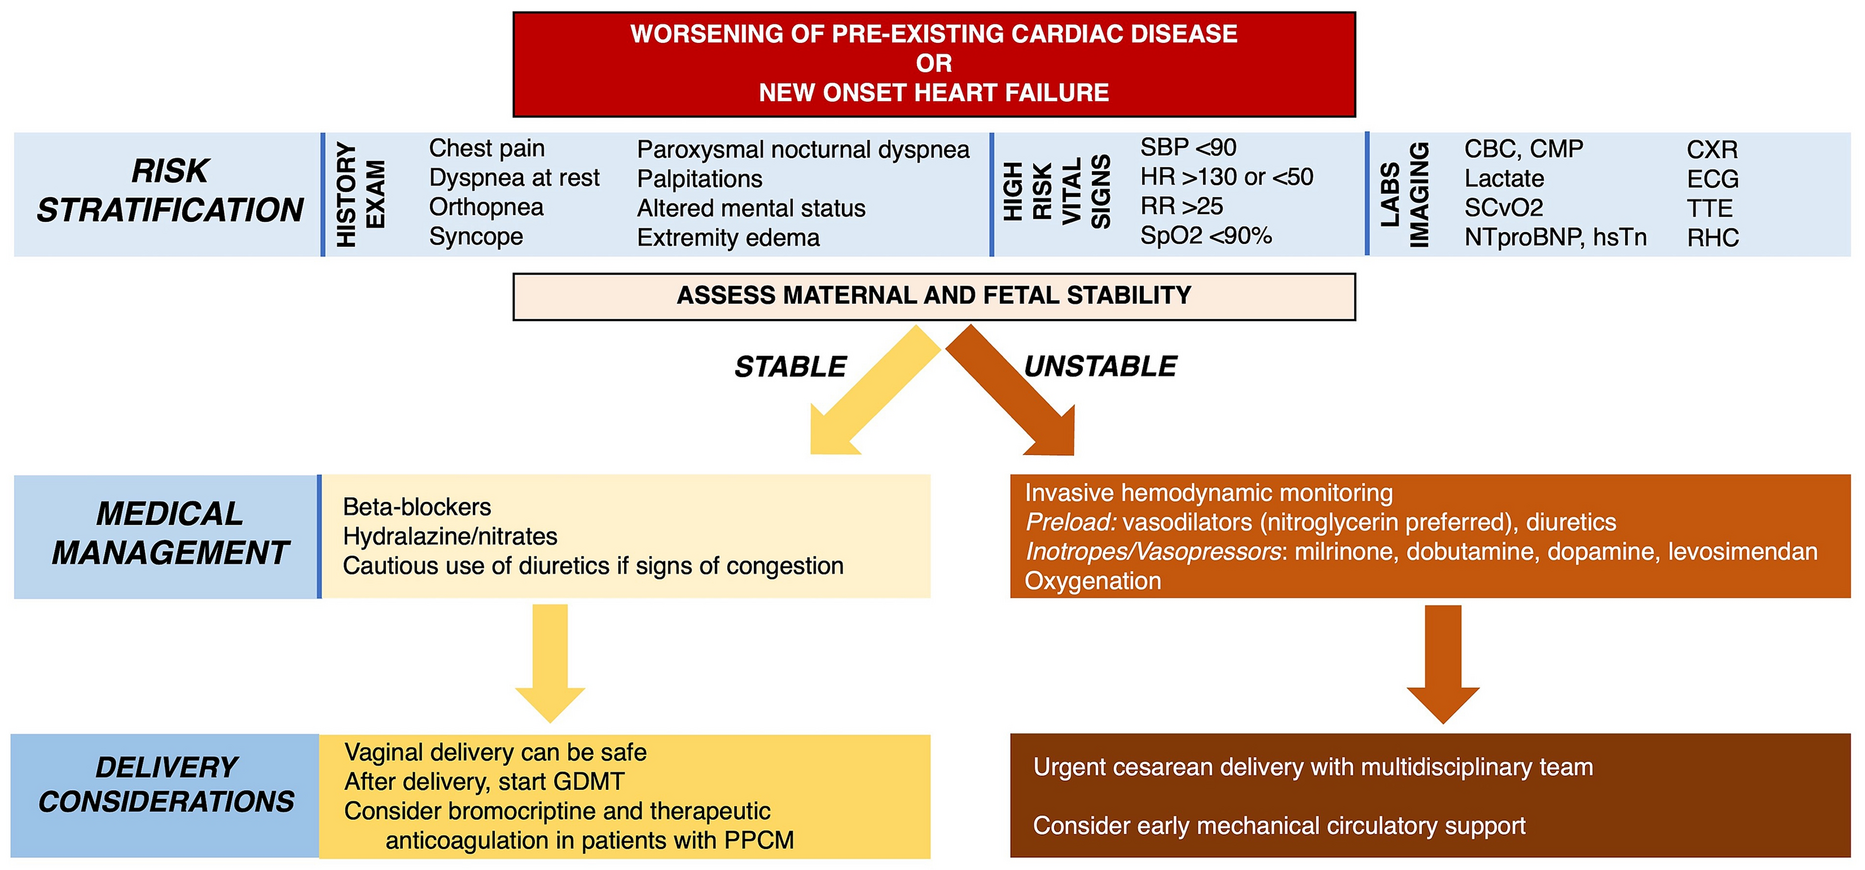 Contemporary Management of Cardiomyopathy and Heart Failure in Pregnancy